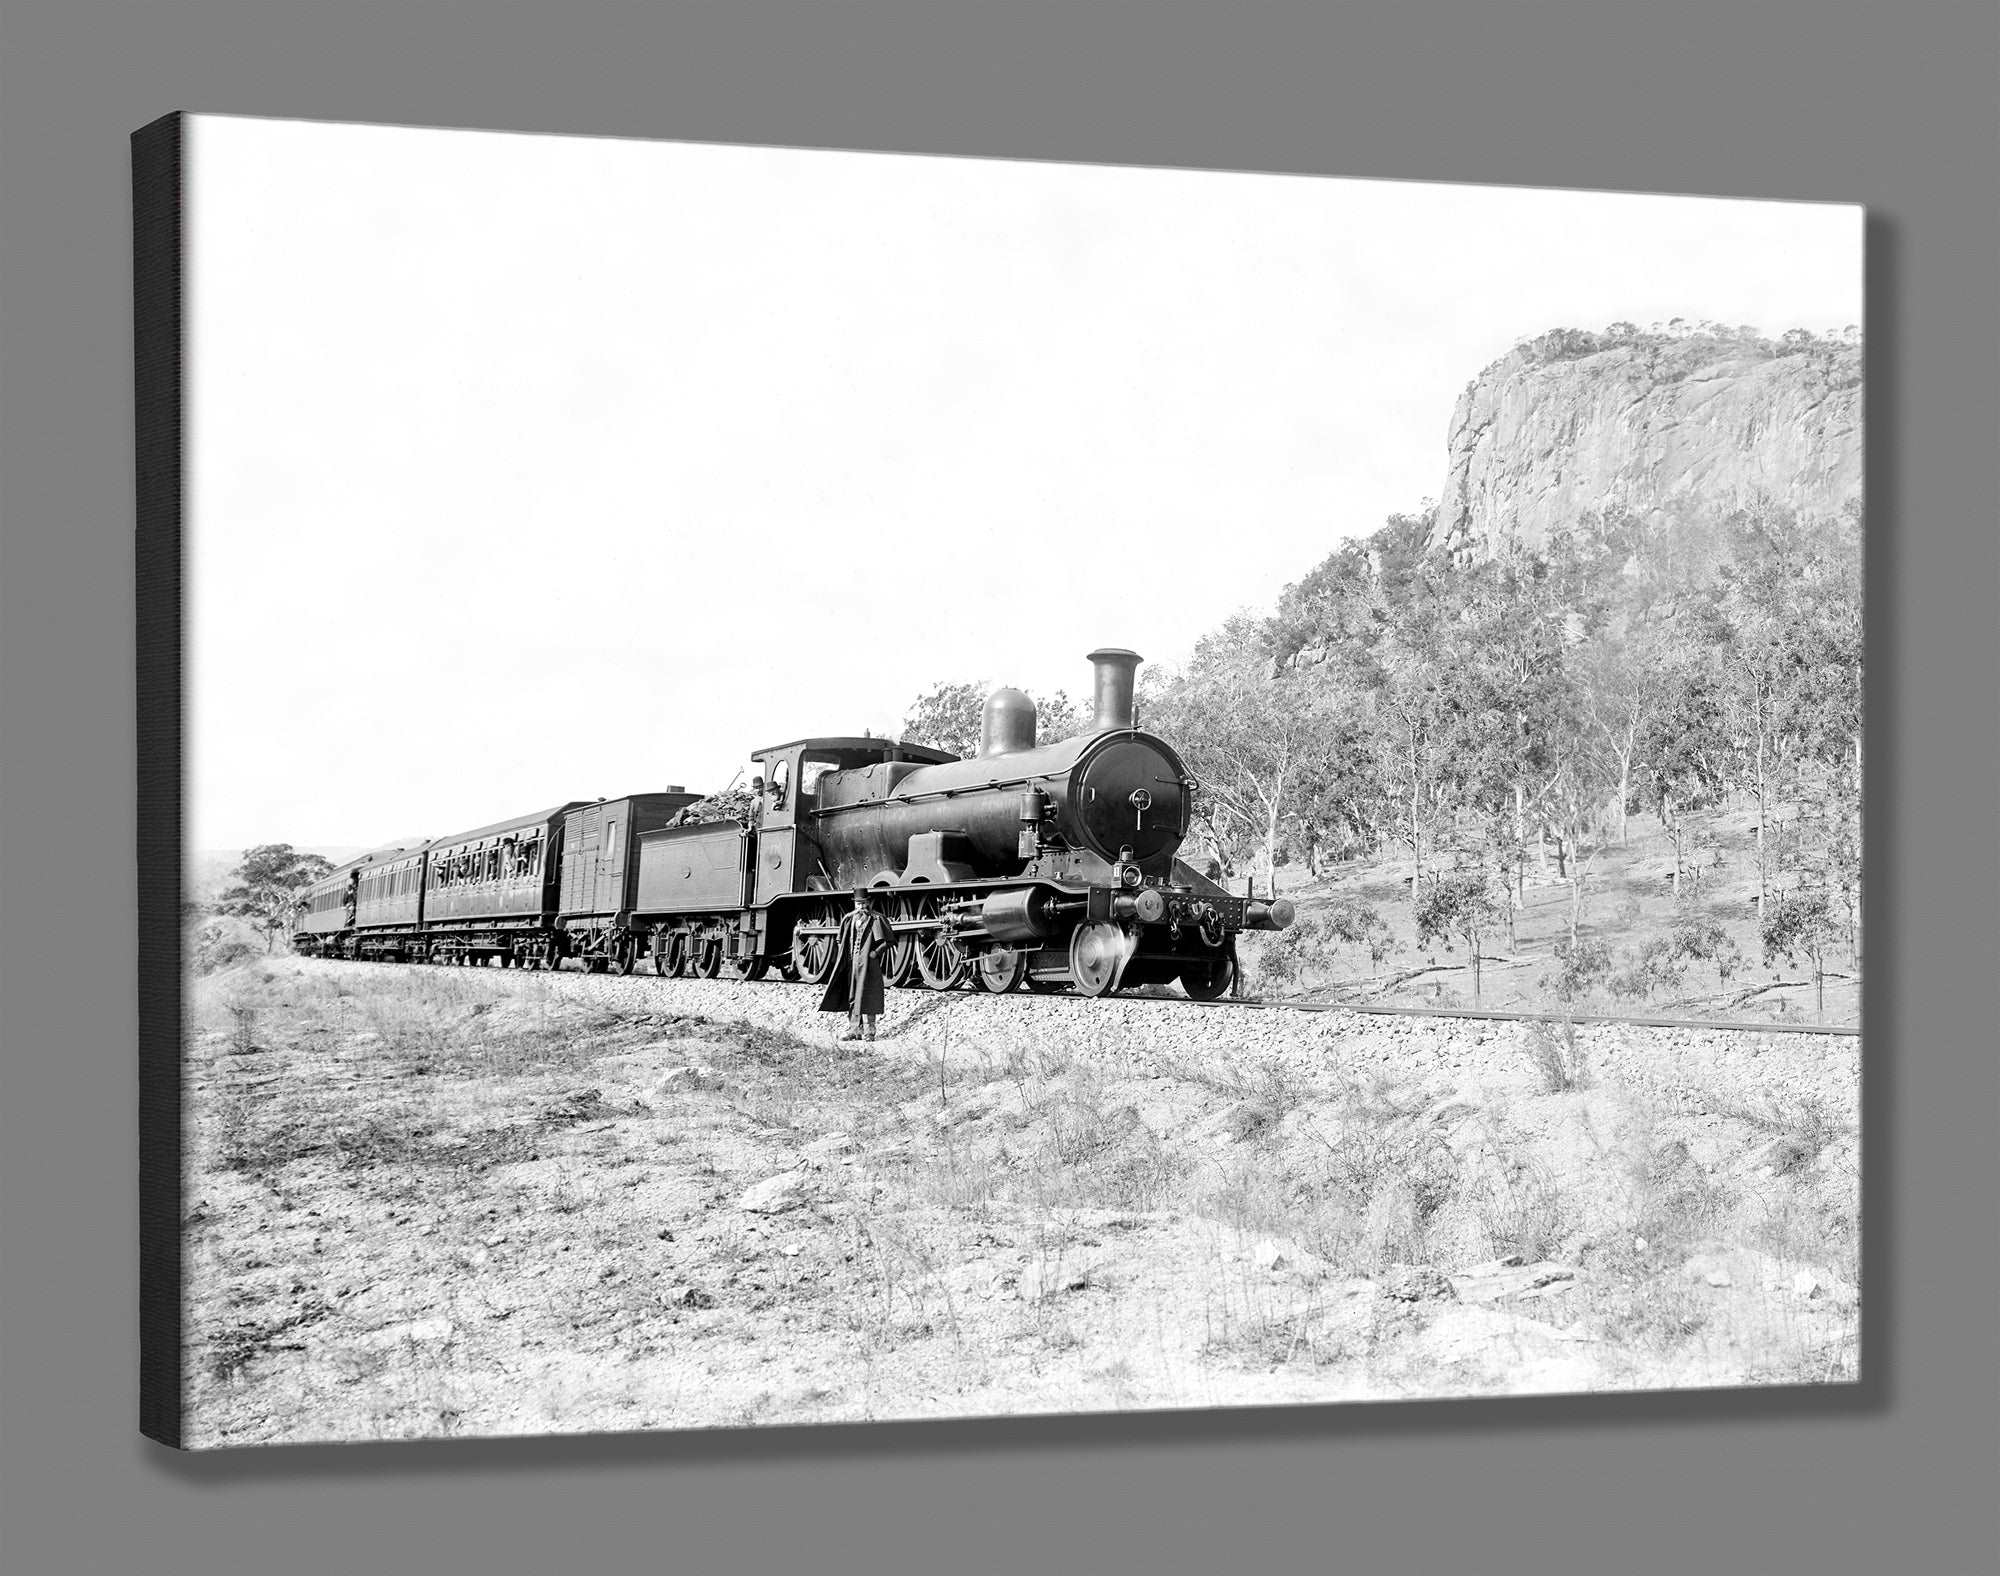 A canvas print reproduction of a photograph of a man standing beside a train